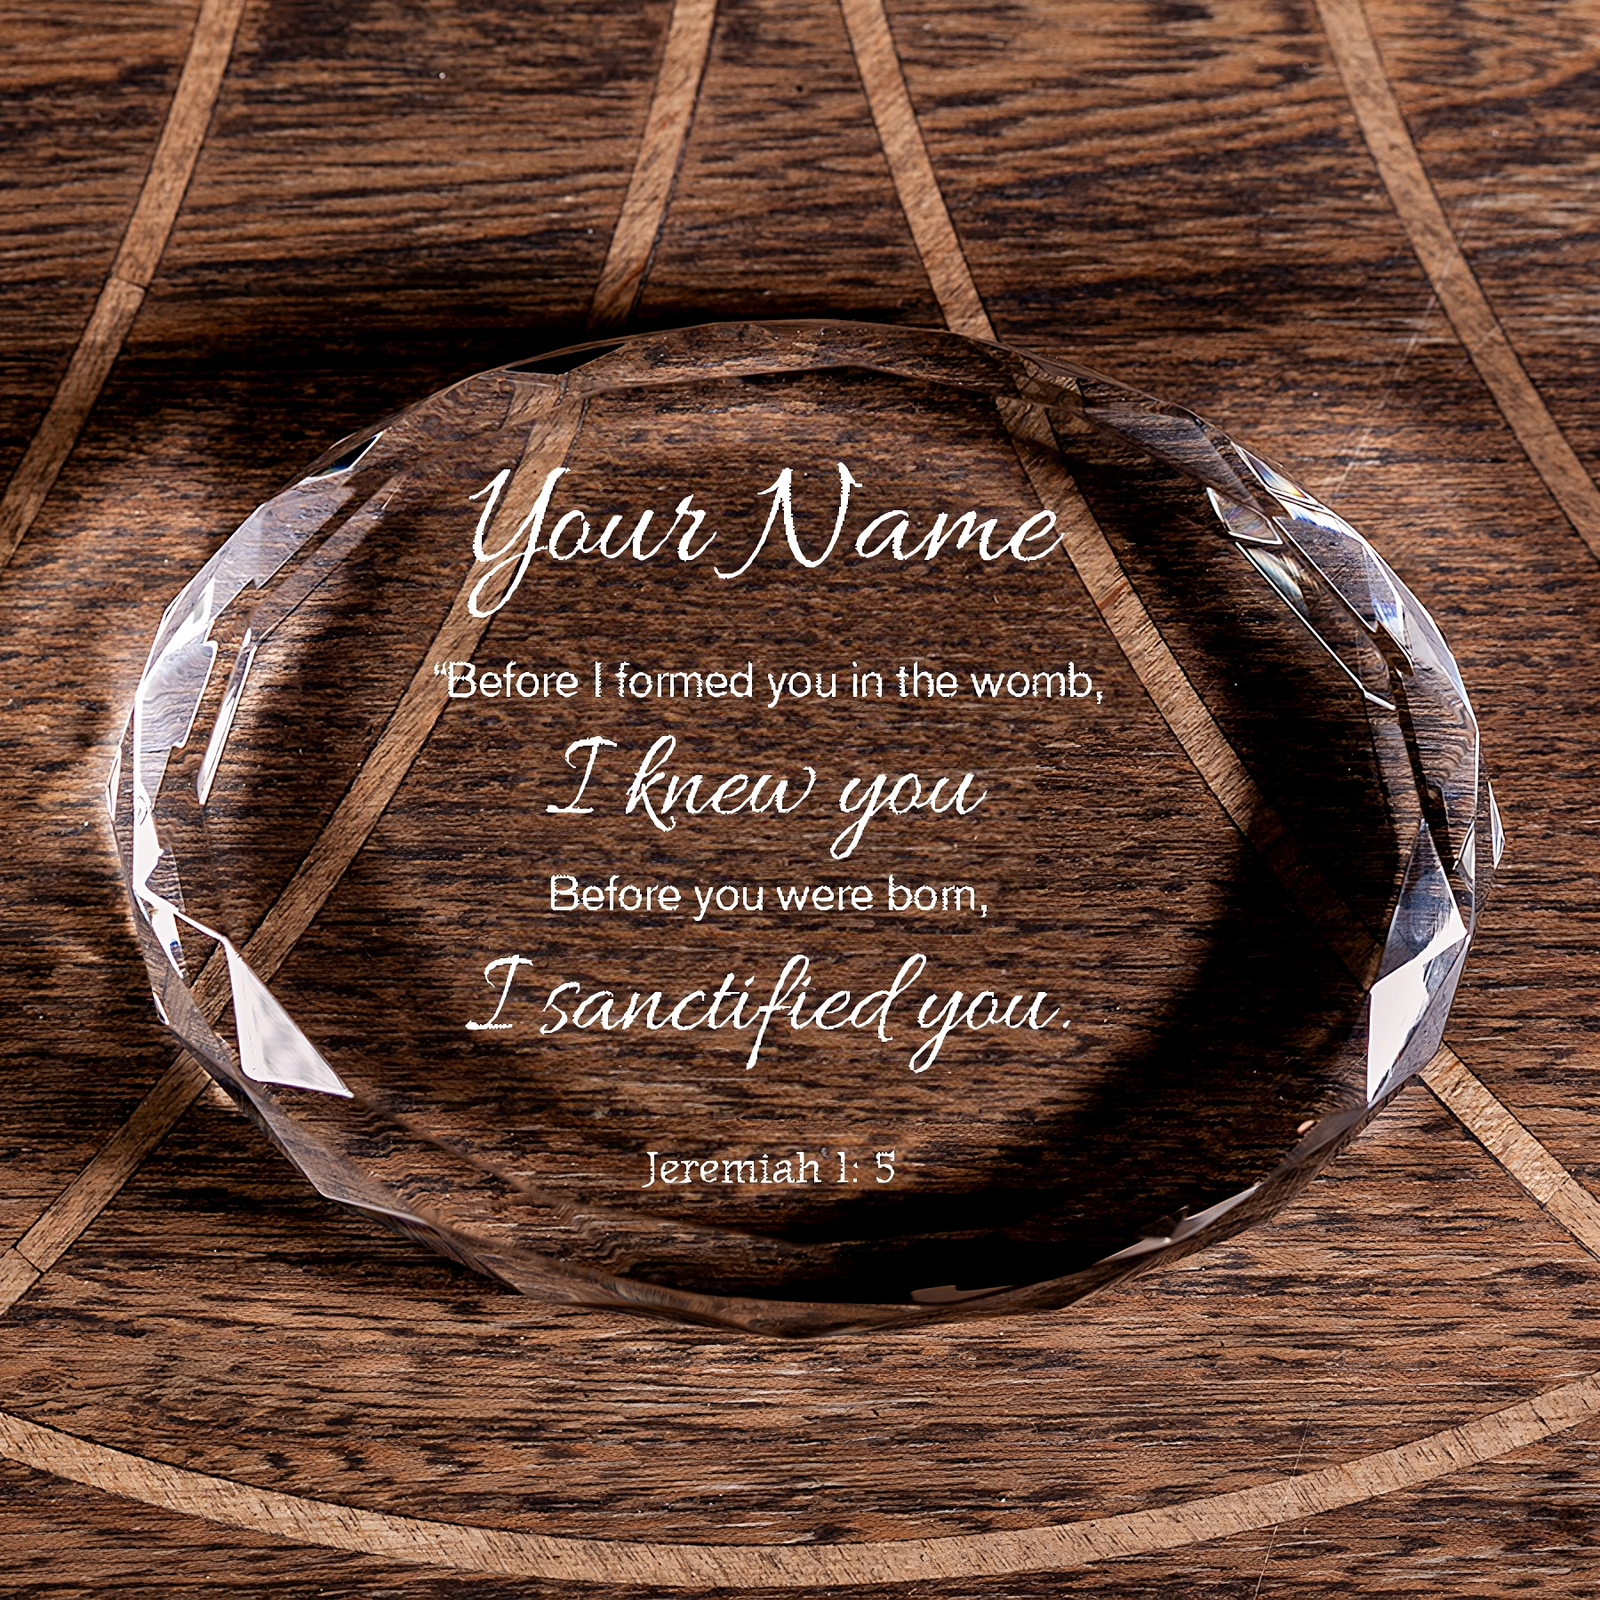 Jeremiah 1:5 I Sanctified You Faceted Oval Crystal Paperweight Personalized Christian Gift-Express Your Love Gifts